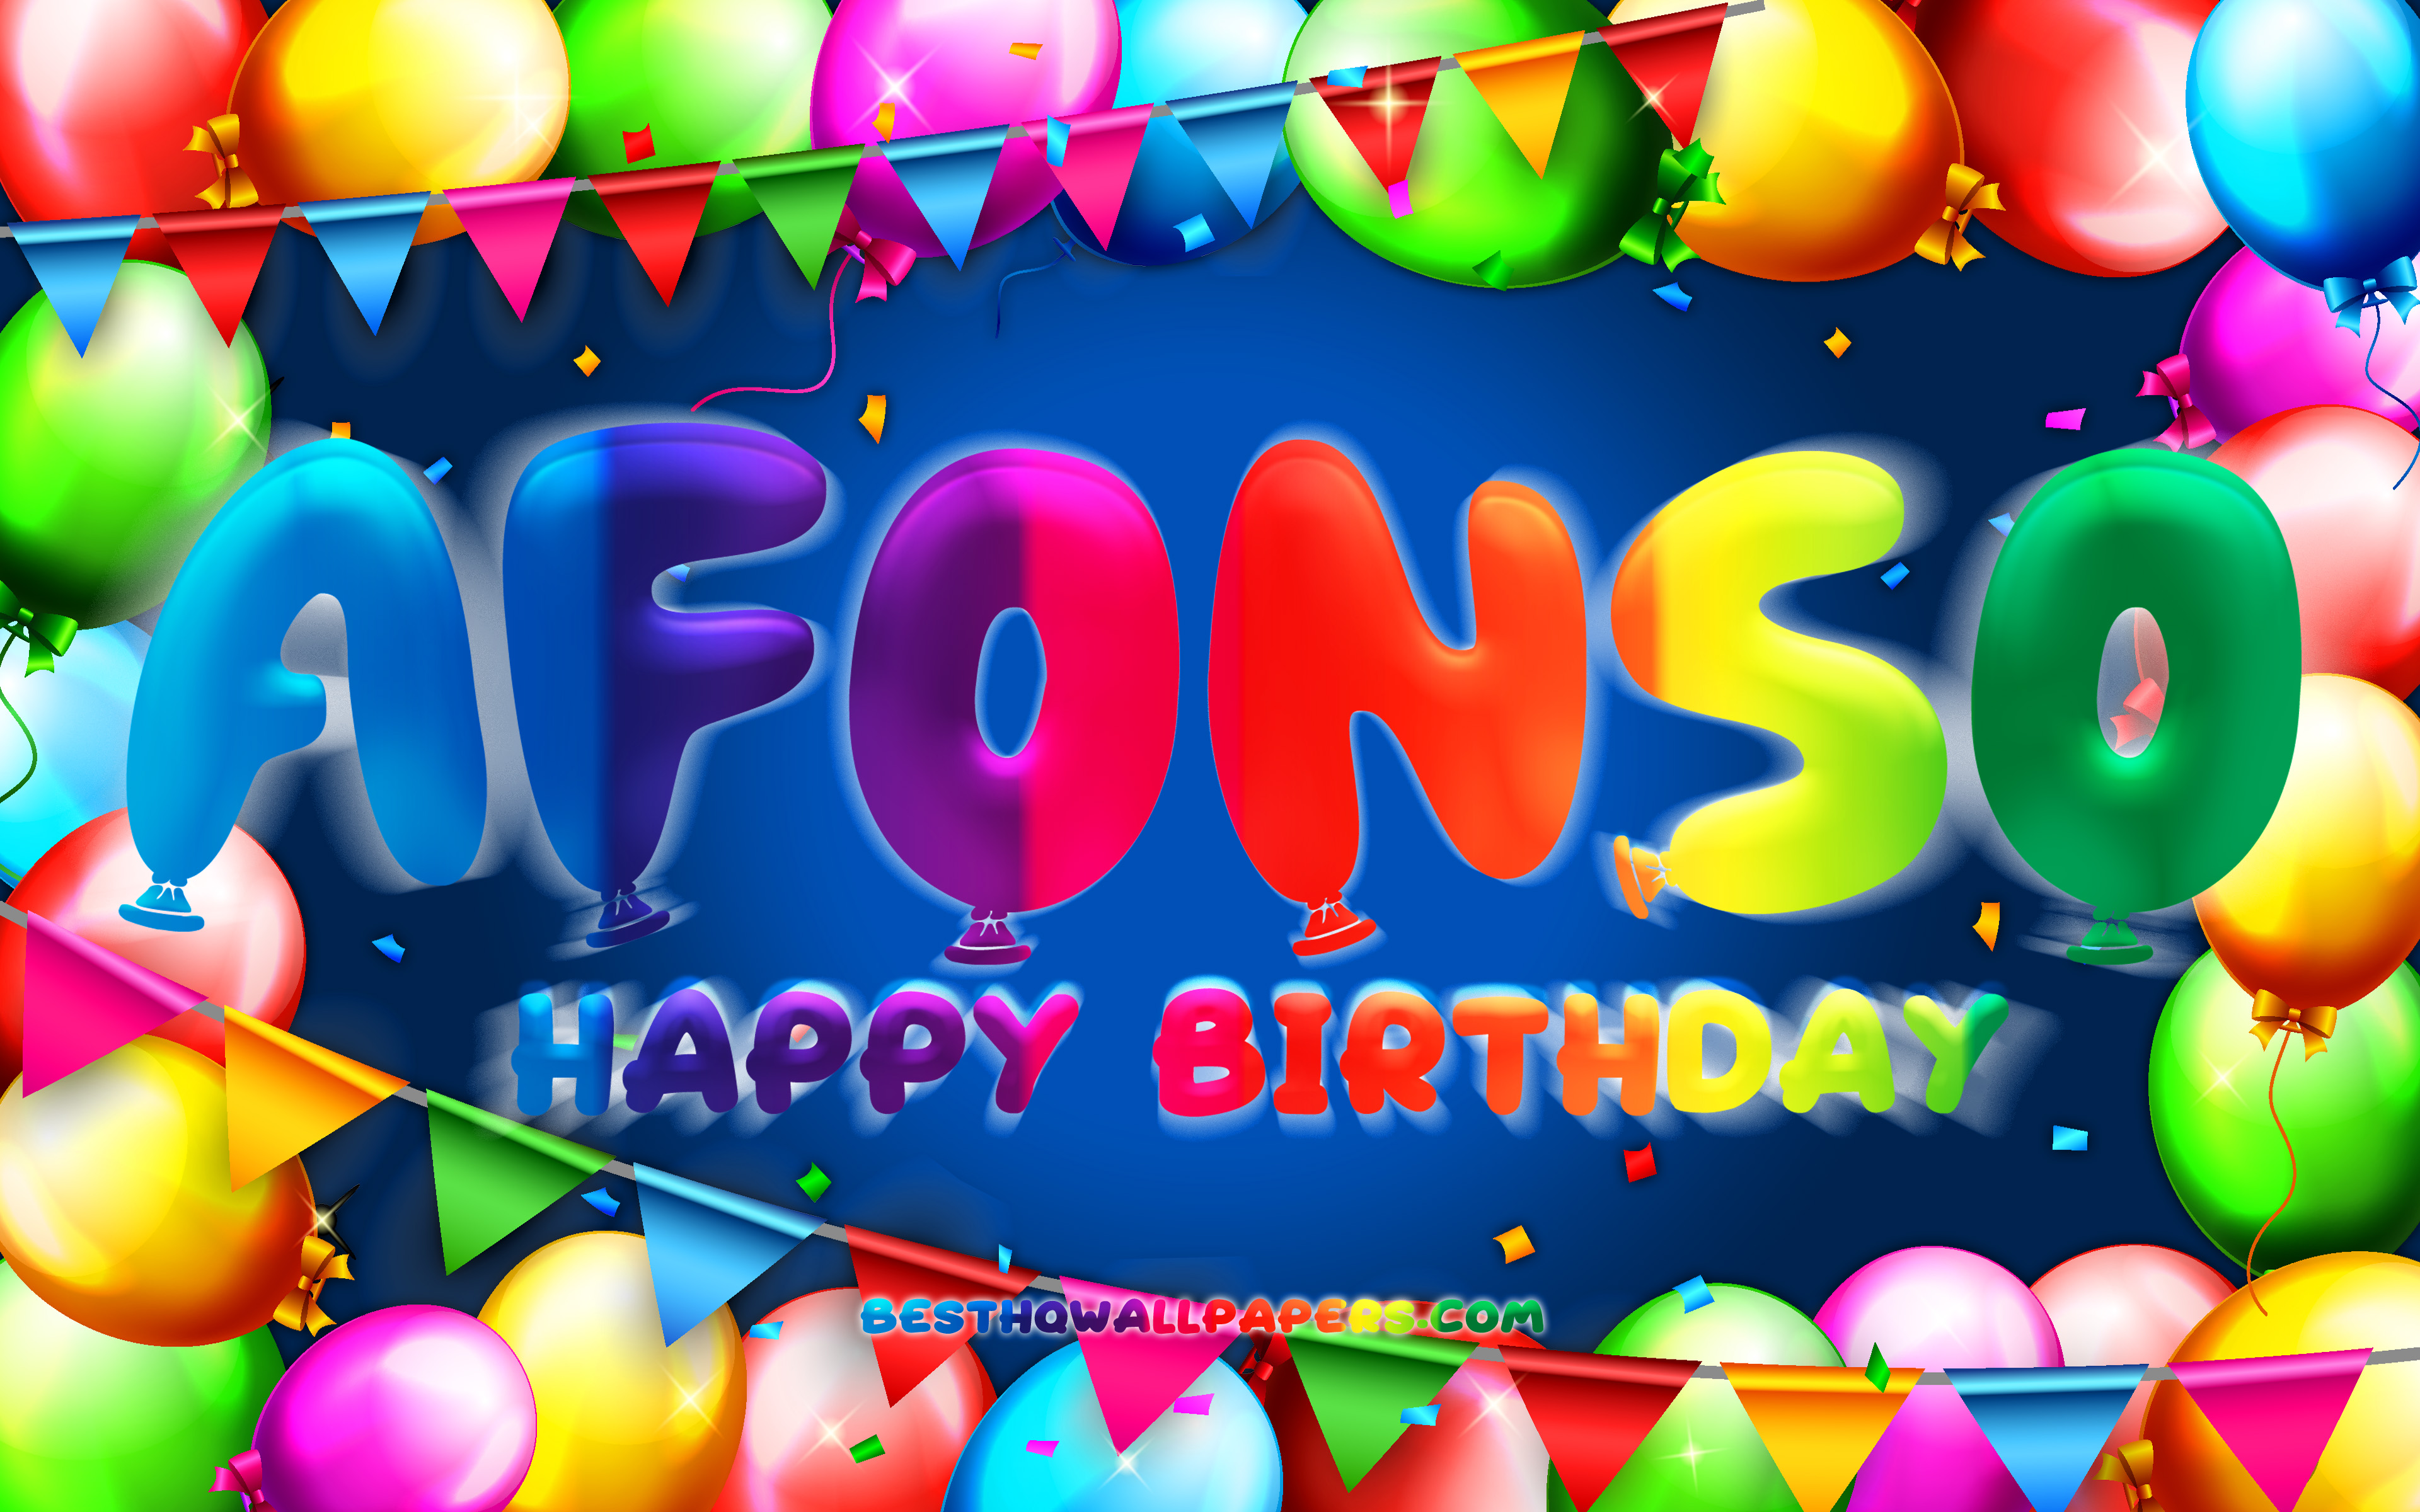 Download wallpapers Happy Birthday Afonso, 4k, colorful balloon frame ...